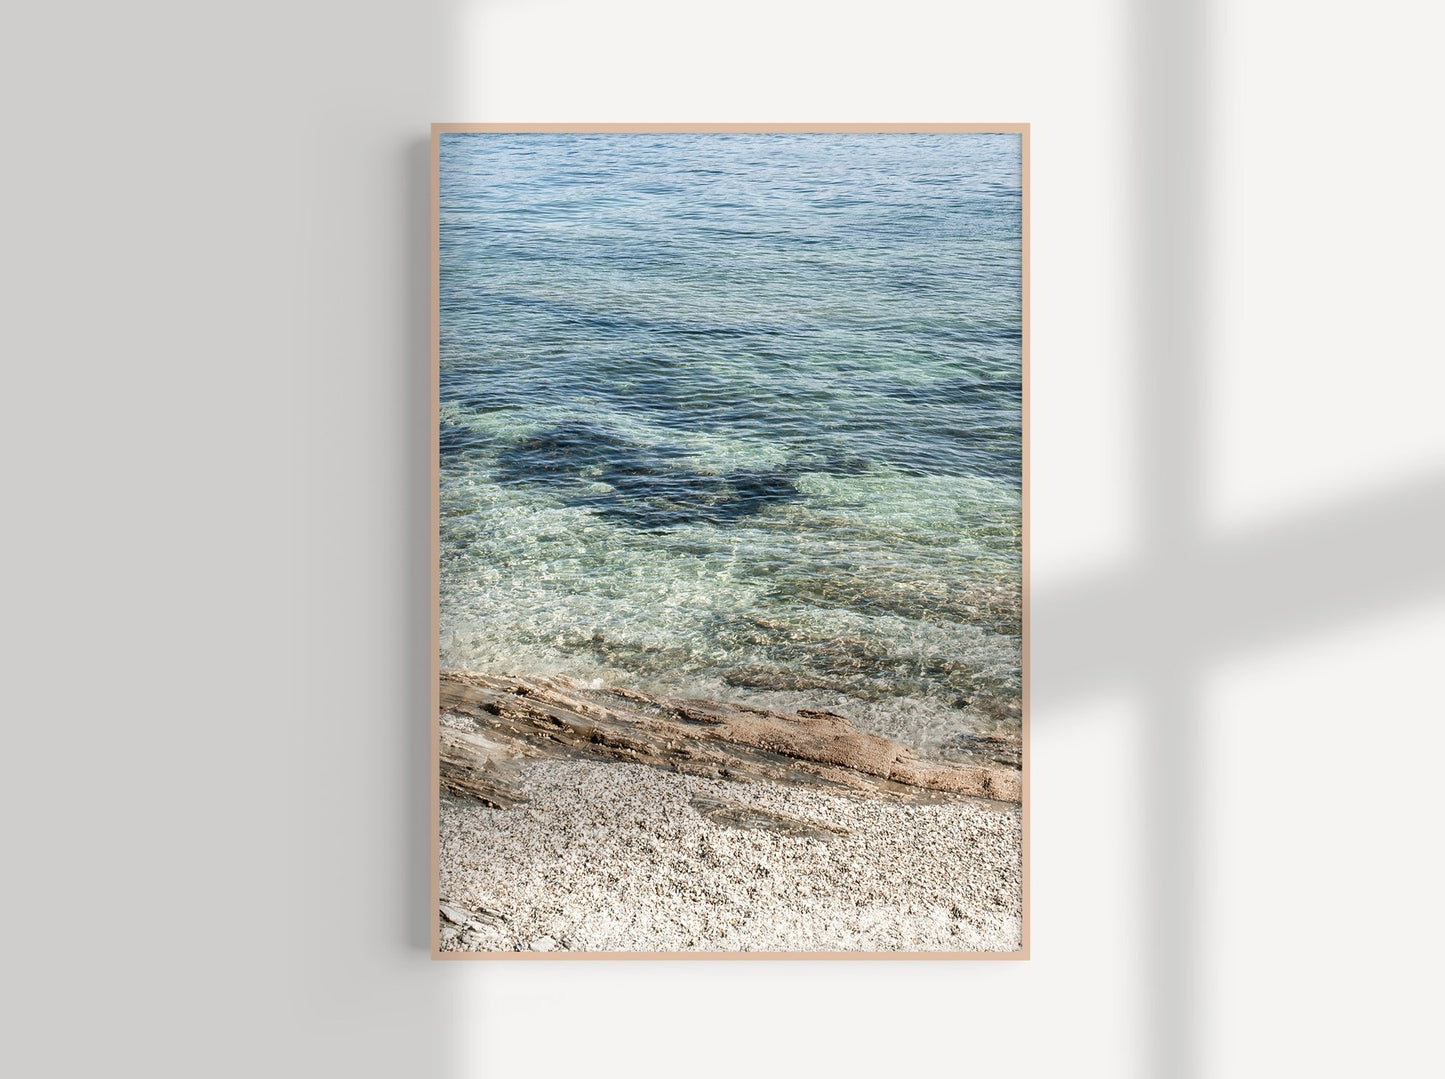 Crystal clear waters, Cornwall - Giclée print on Hahnemühle Photo Rag paper